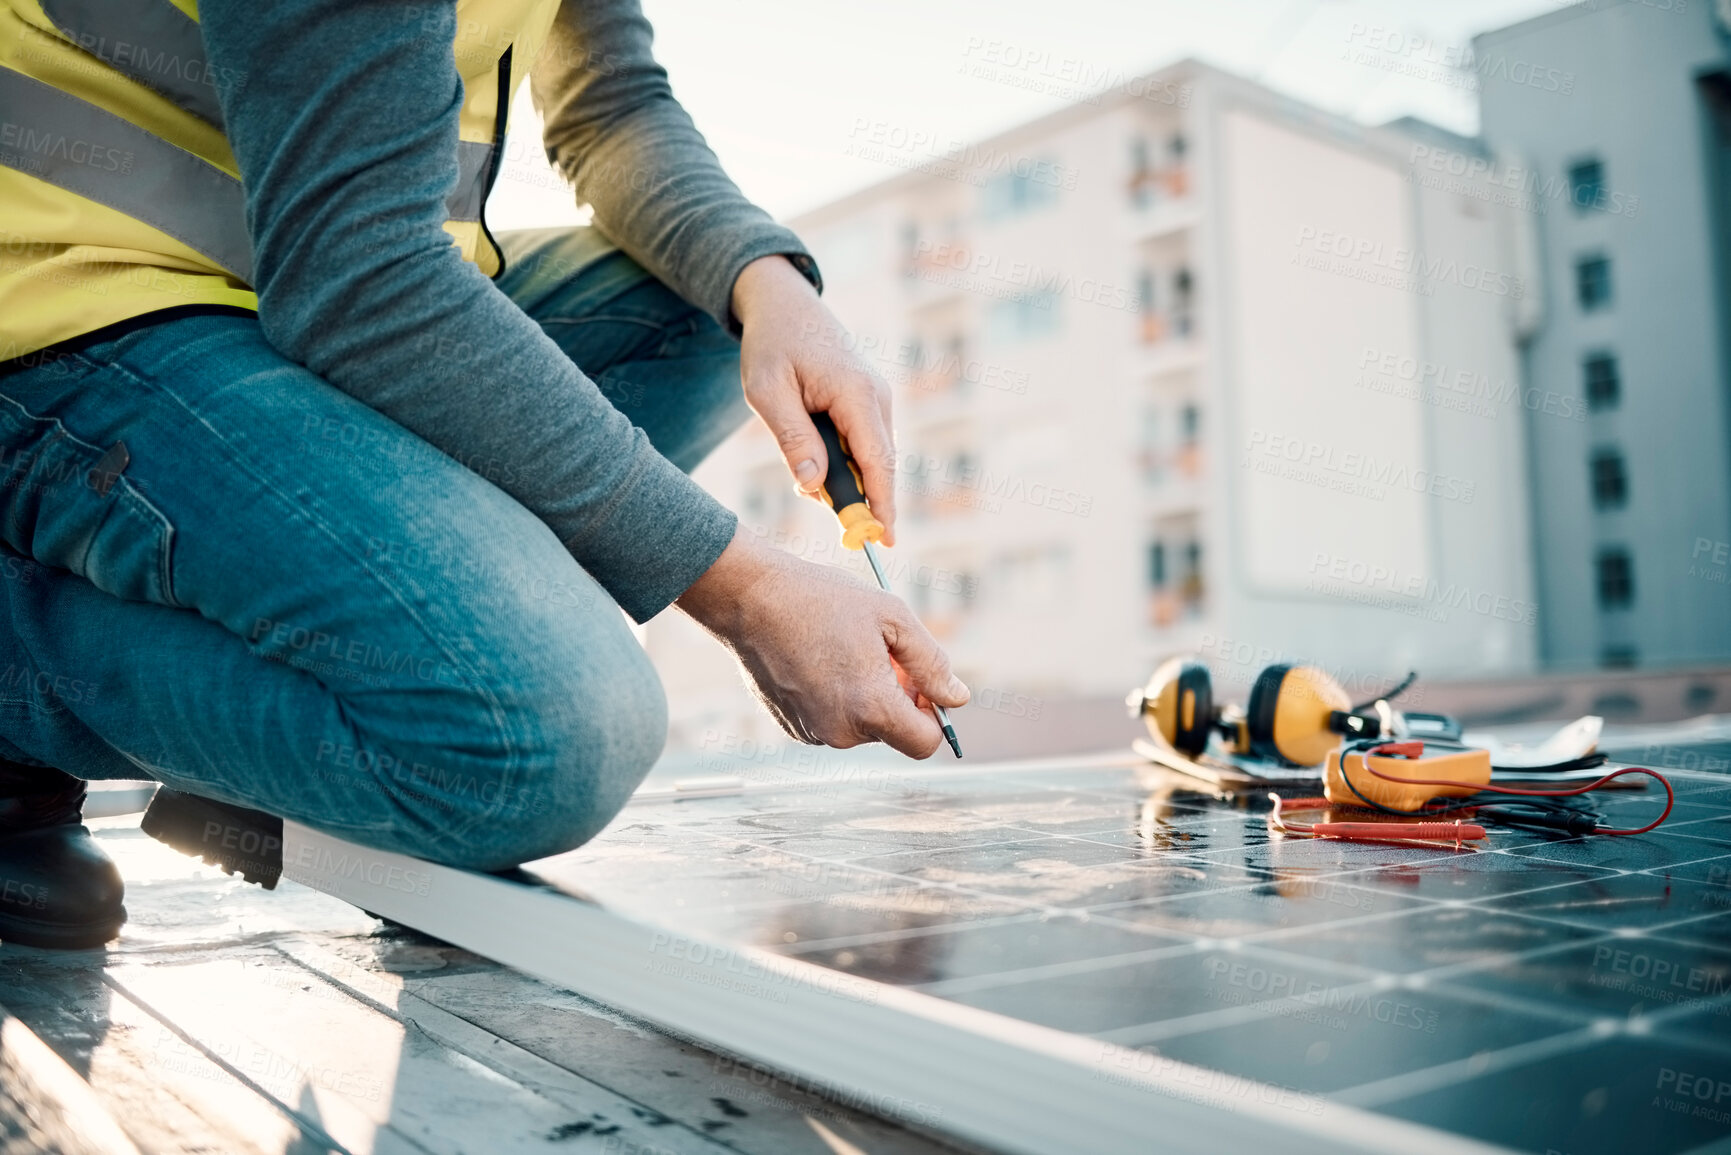 Buy stock photo Solar panel, city and construction worker hands with tools for renewable energy and electricity. Community innovation, roof work and engineering employ install eco friendly and sustainability product